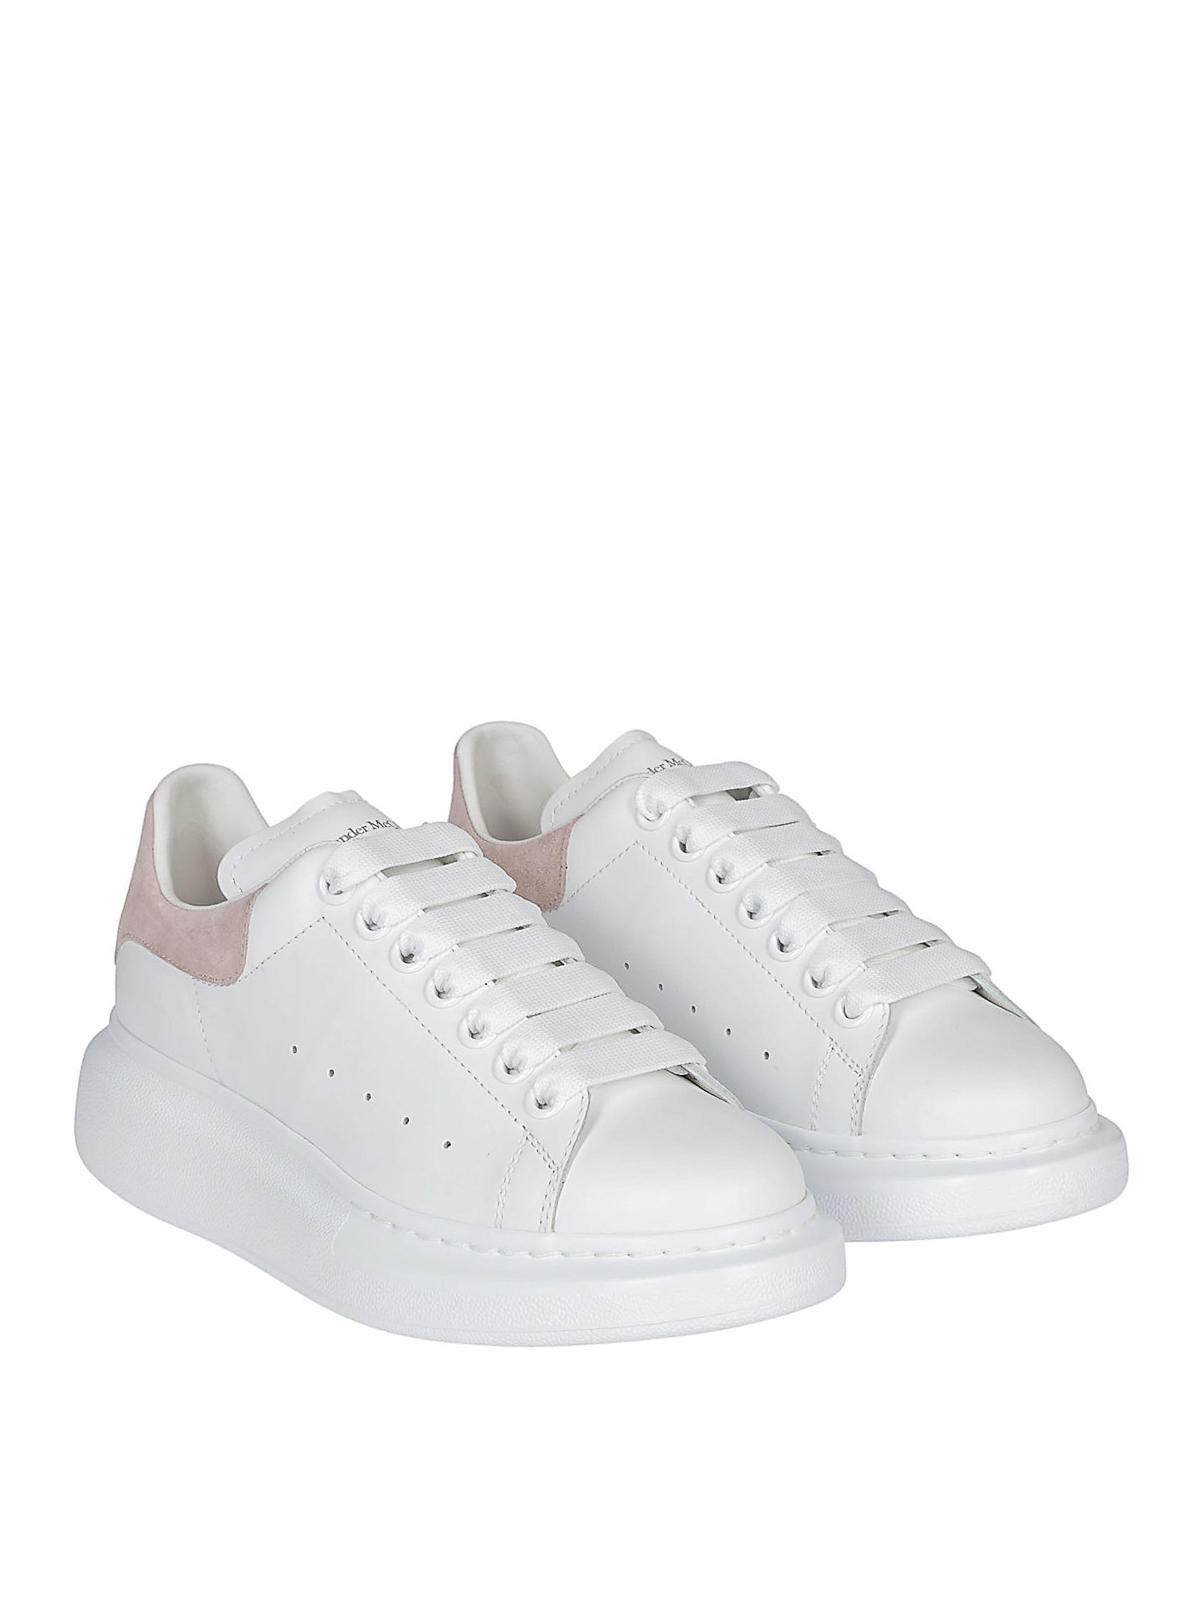 In time coverage marketing Trainers Alexander Mcqueen - Oversized sole sneakers with pink heel tab -  553770WHGP79182